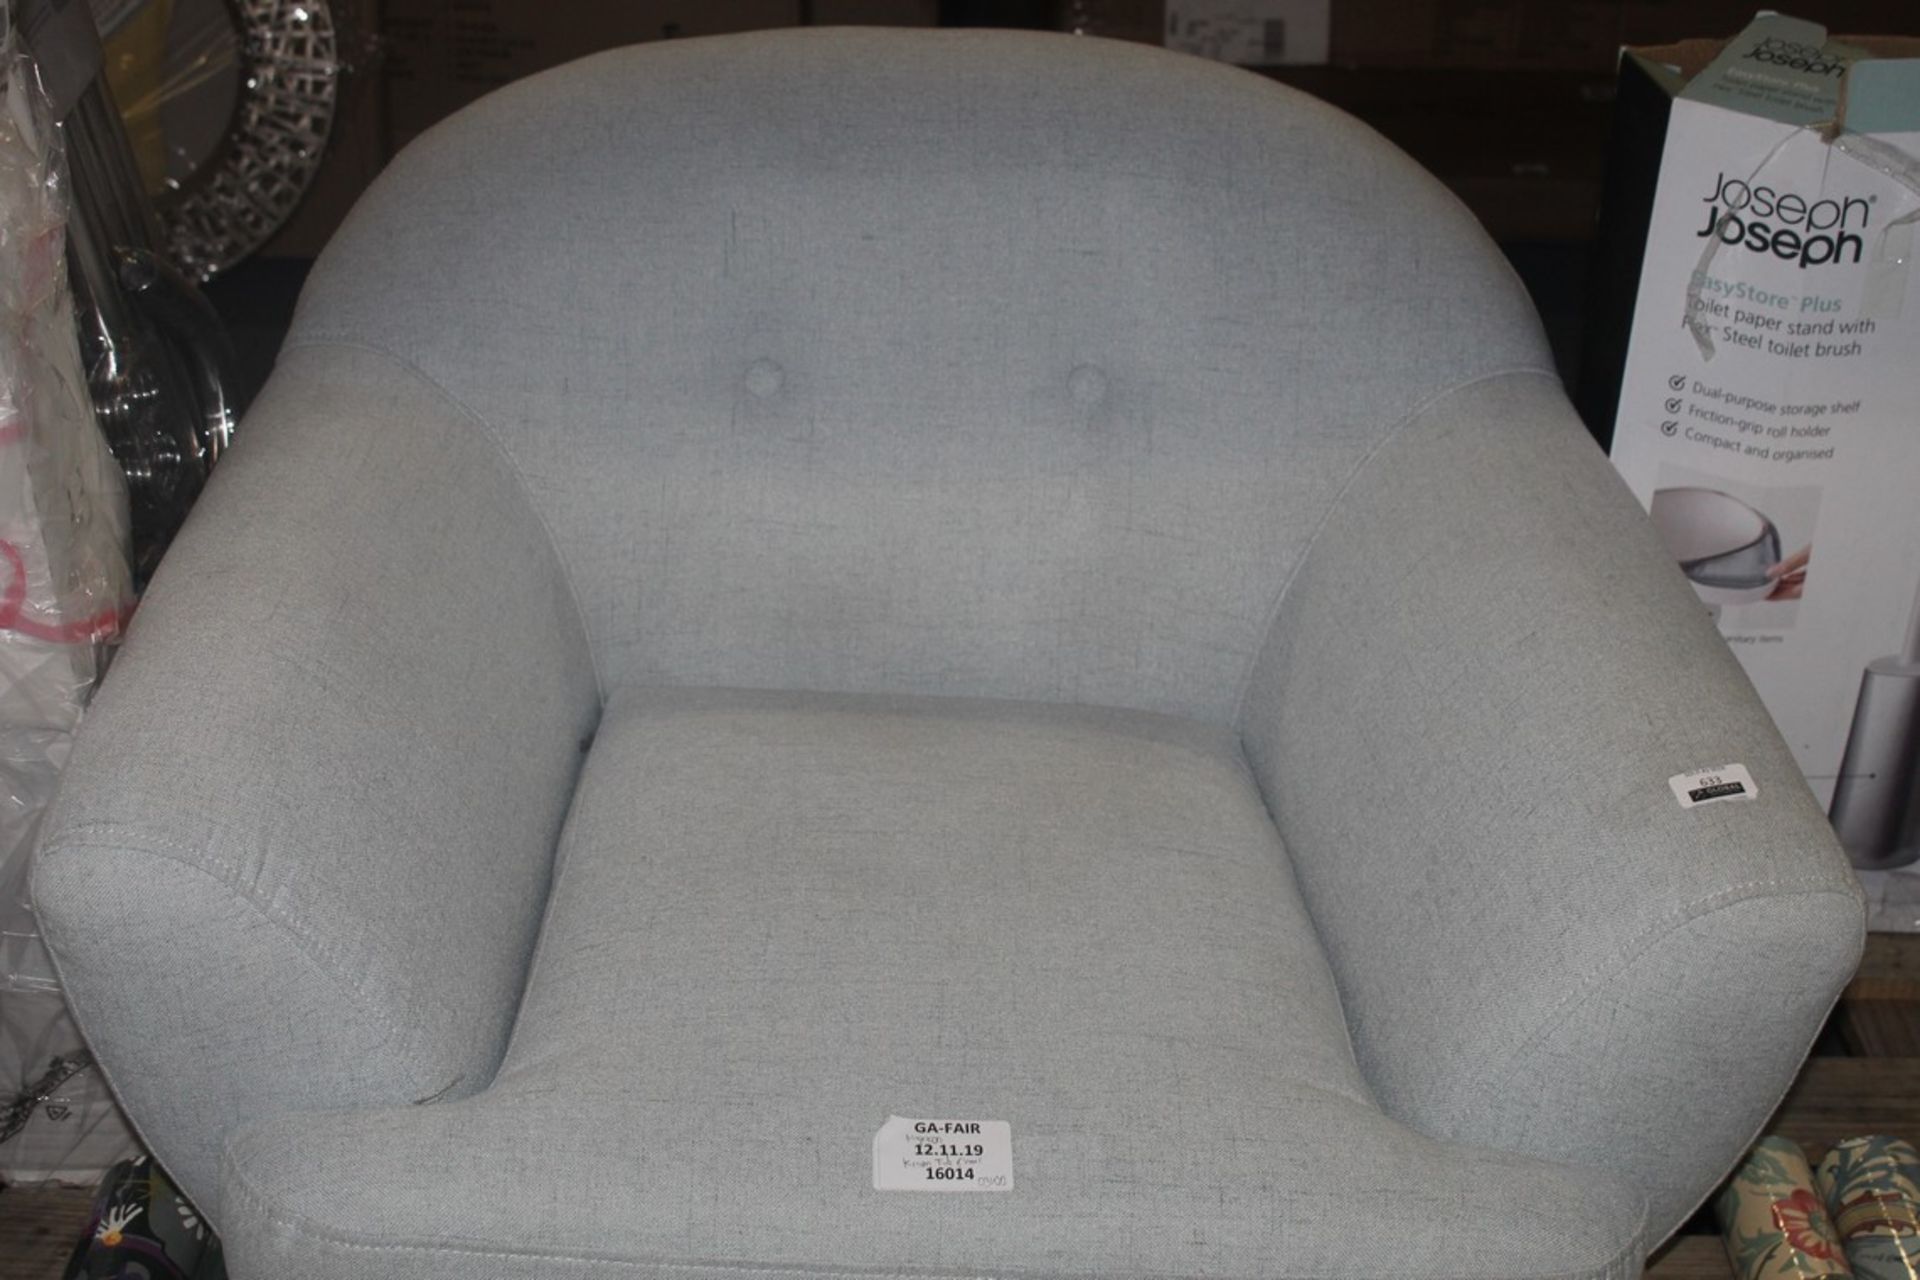 Hykkon Duck Egg Blue Fabric Tub Chair RRP £310 (16014) (Public Viewing and Appraisals Available)